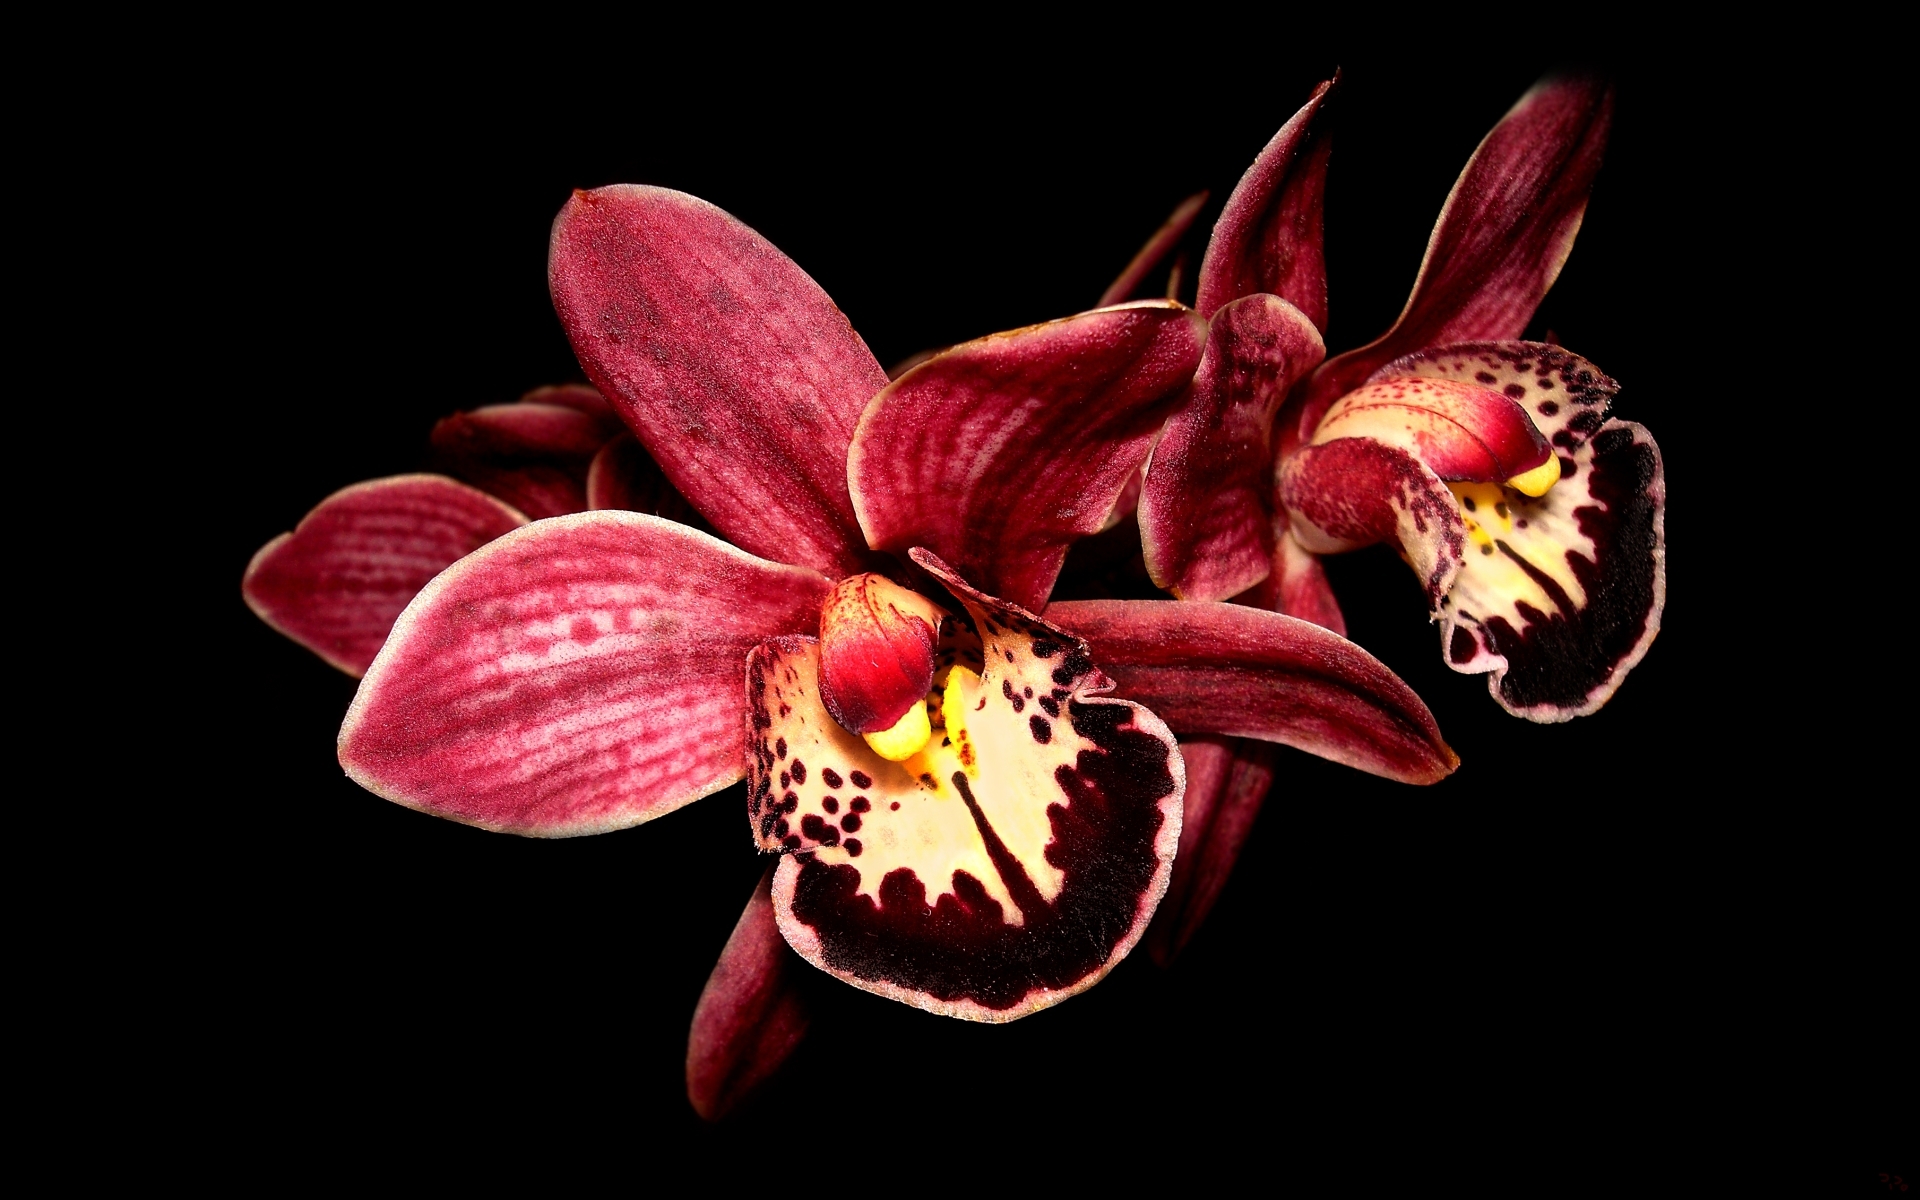 General 1920x1200 plants flowers orchids macro red black background